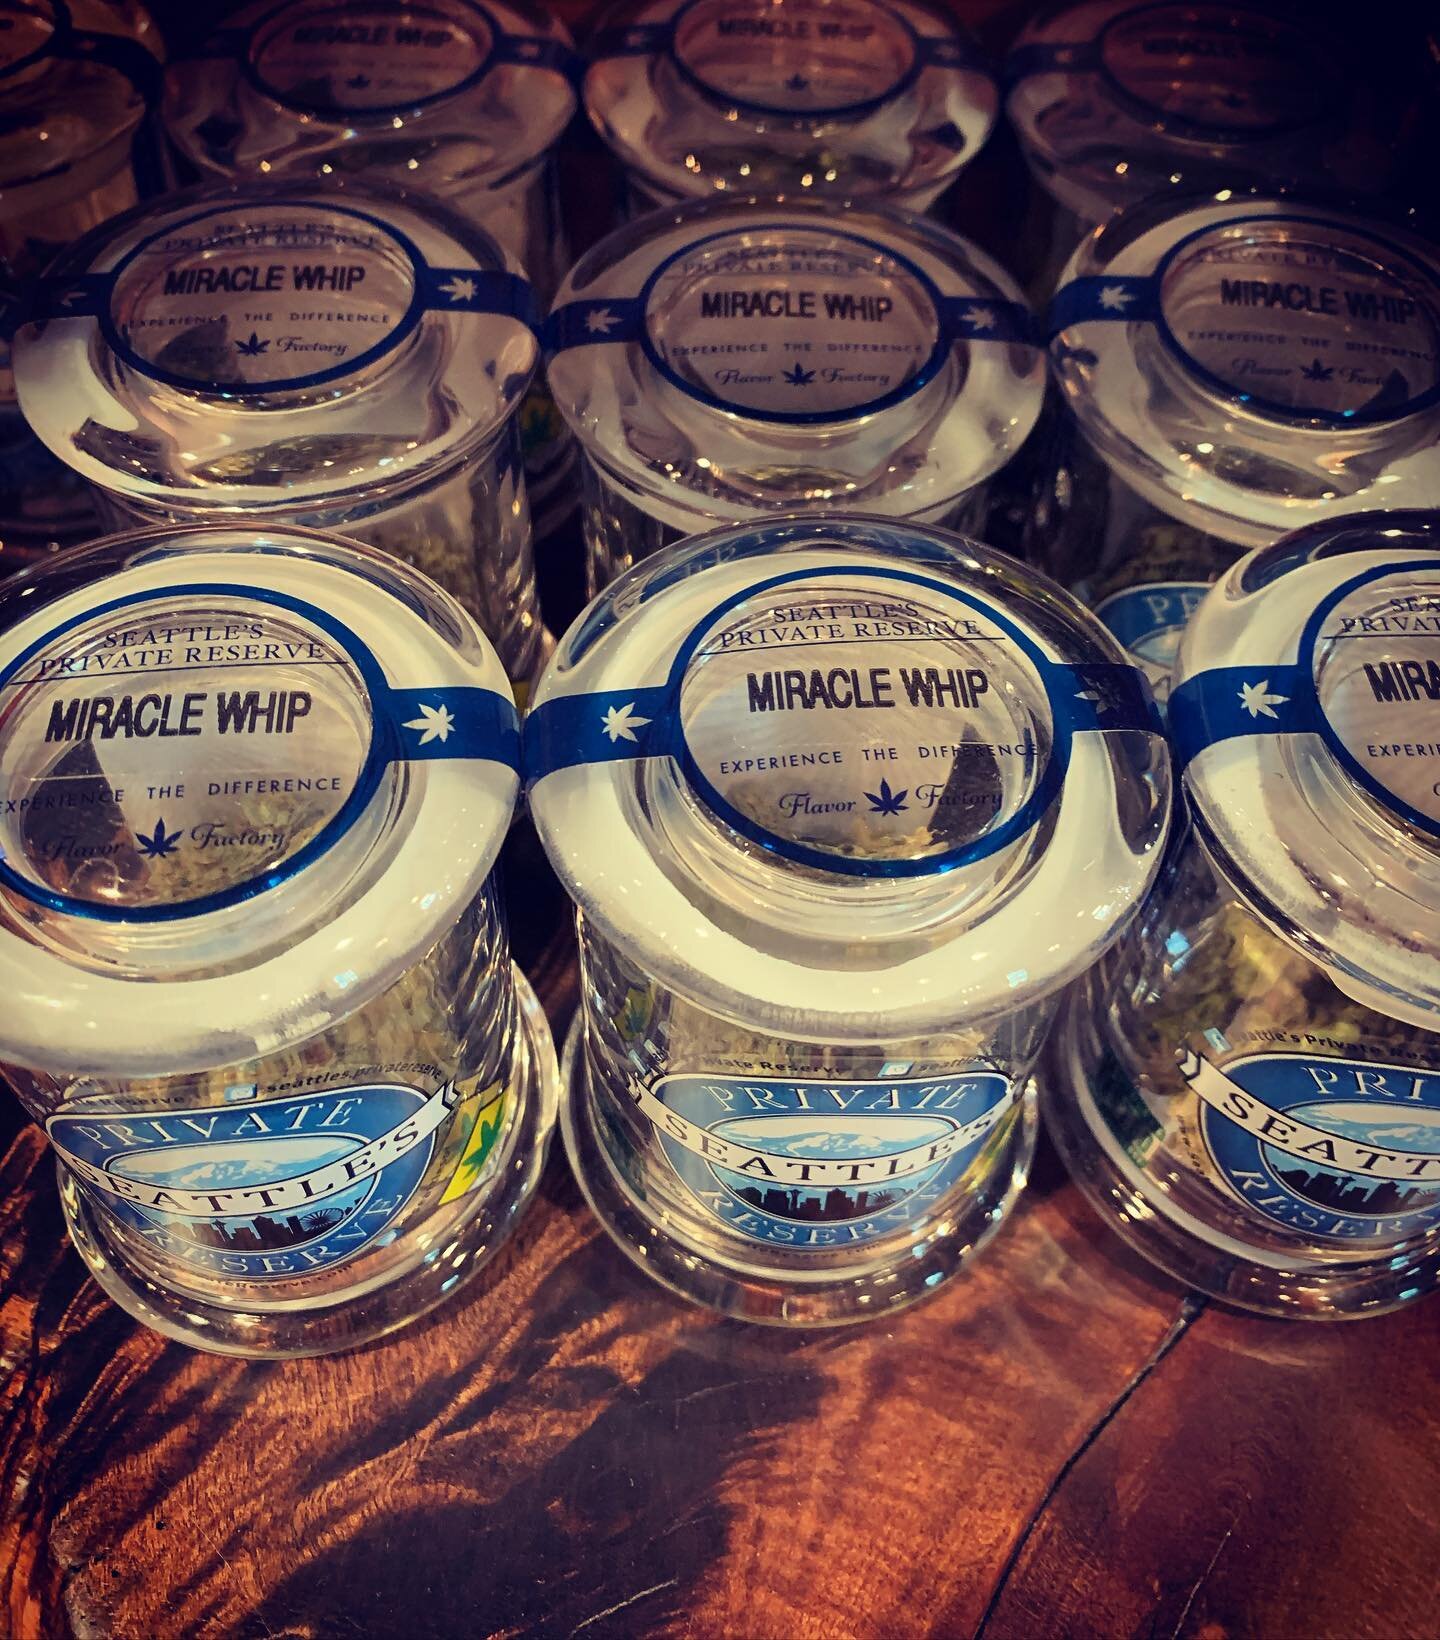 Miracle Whip is on the menu for #topshelftuesday 😜‼️ Making my mouth water @seattles.privatereserve 🤤🔥 Don&rsquo;t miss out 💪🏼💪🏼
&bull;
&bull;
&bull;
#miraclewhipstrain #spr #seattleprivatereserve #topshelf #bowlfortwo #puffpuffpass #finestsel